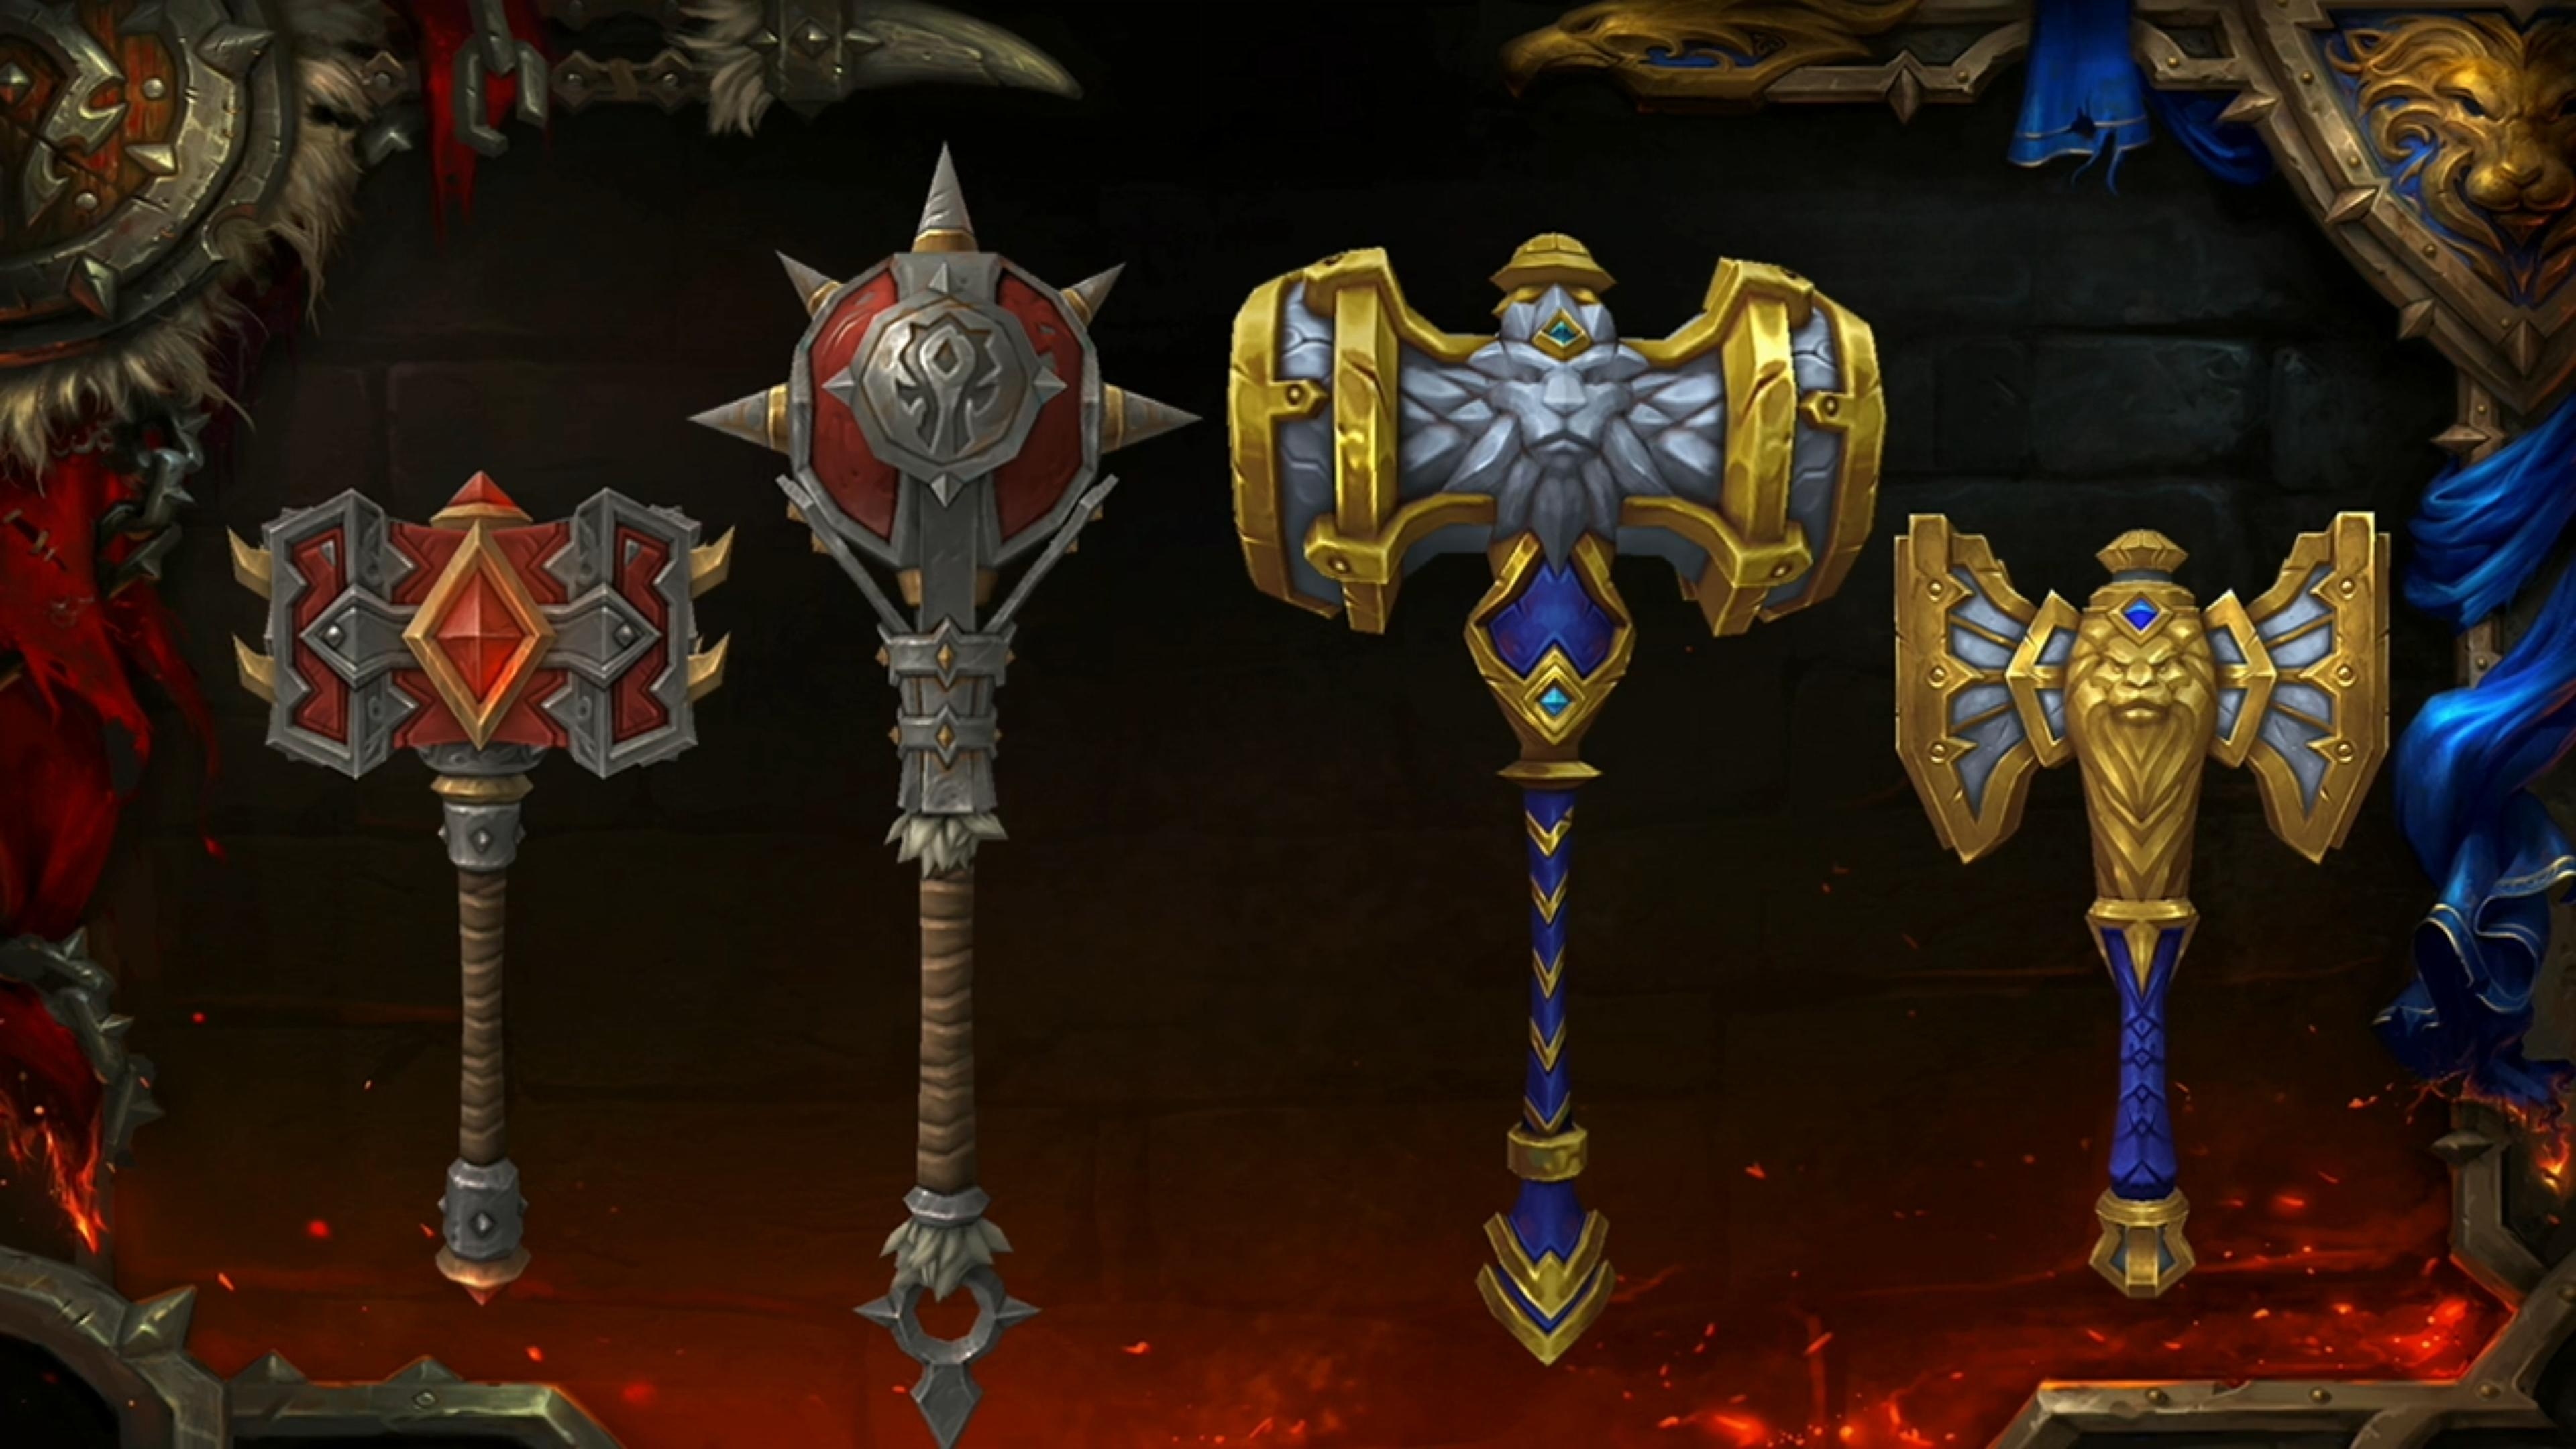 BlizzCon 2017: The Art of World of Warcraft Panel Overview and Screenshots - Wowhead News